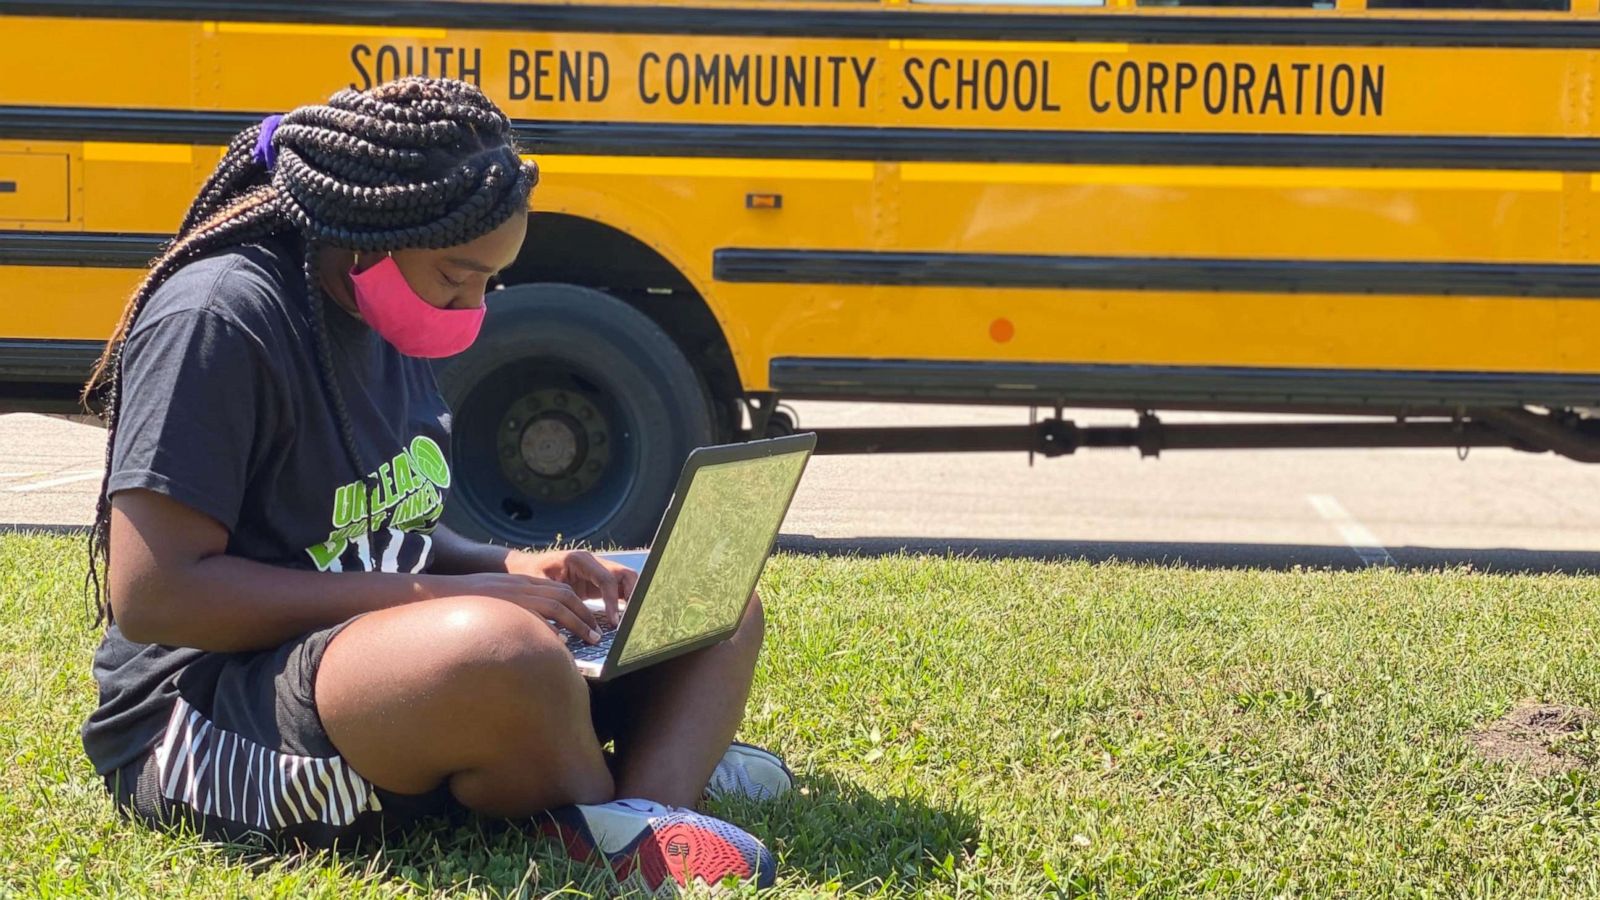 PHOTO: Leronda-Cleveland-1.jpg - Leronda Cleveland, a junior at Washington High School in South Bend, Ind., sits on the grass outside one of South Bend Community School Corporation's Wi-Fi buses.